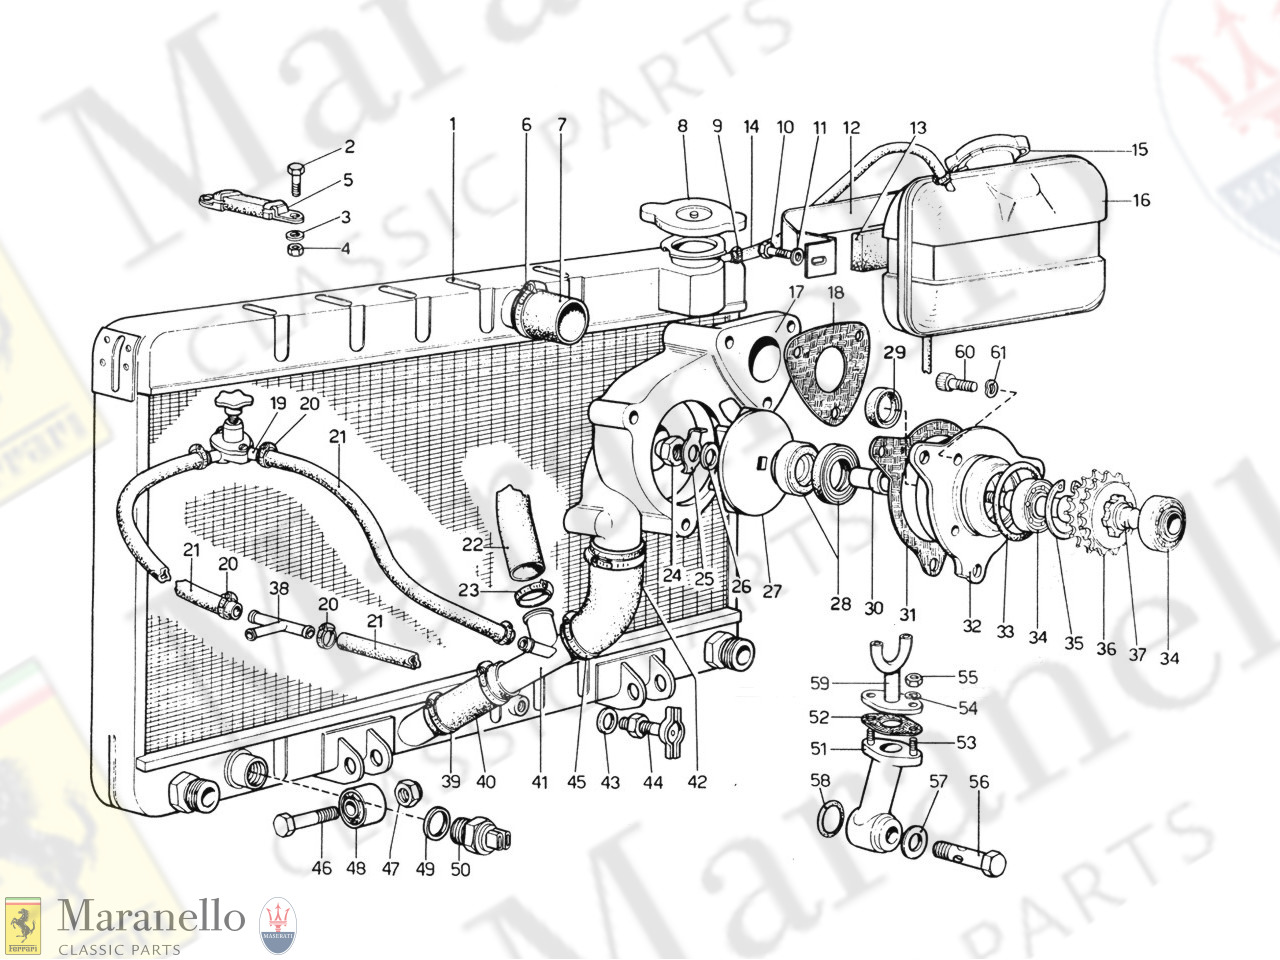 009A - Cooling System - Water Pump & Radiator (1974 Revision - Cars With Air Pollution System)